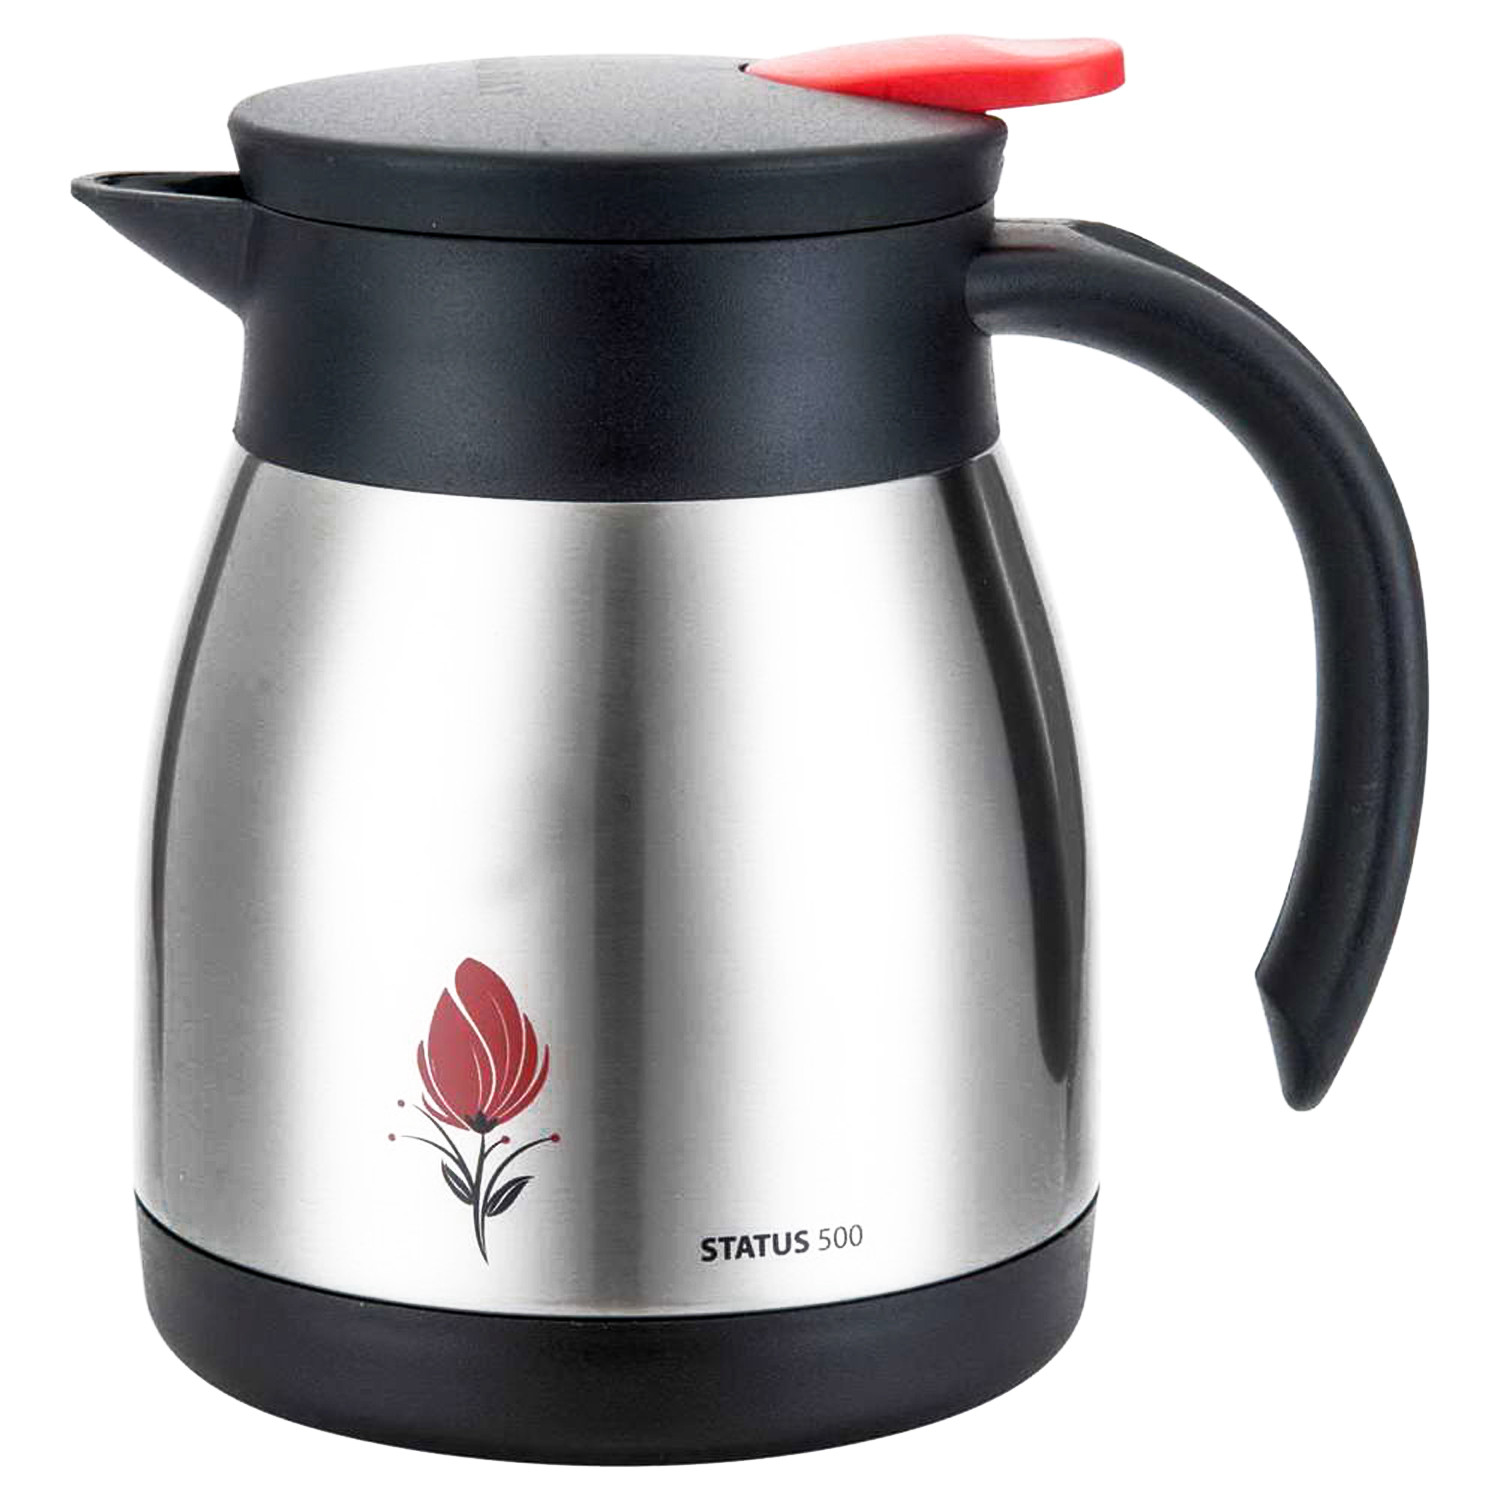 Kuber Industries Stainless Thermo Steel Double-Wall Vacuum Insulated Coffee,Tea, Beverage Pot/Kettle, 500ml (Black)-HS42KUBMART25105